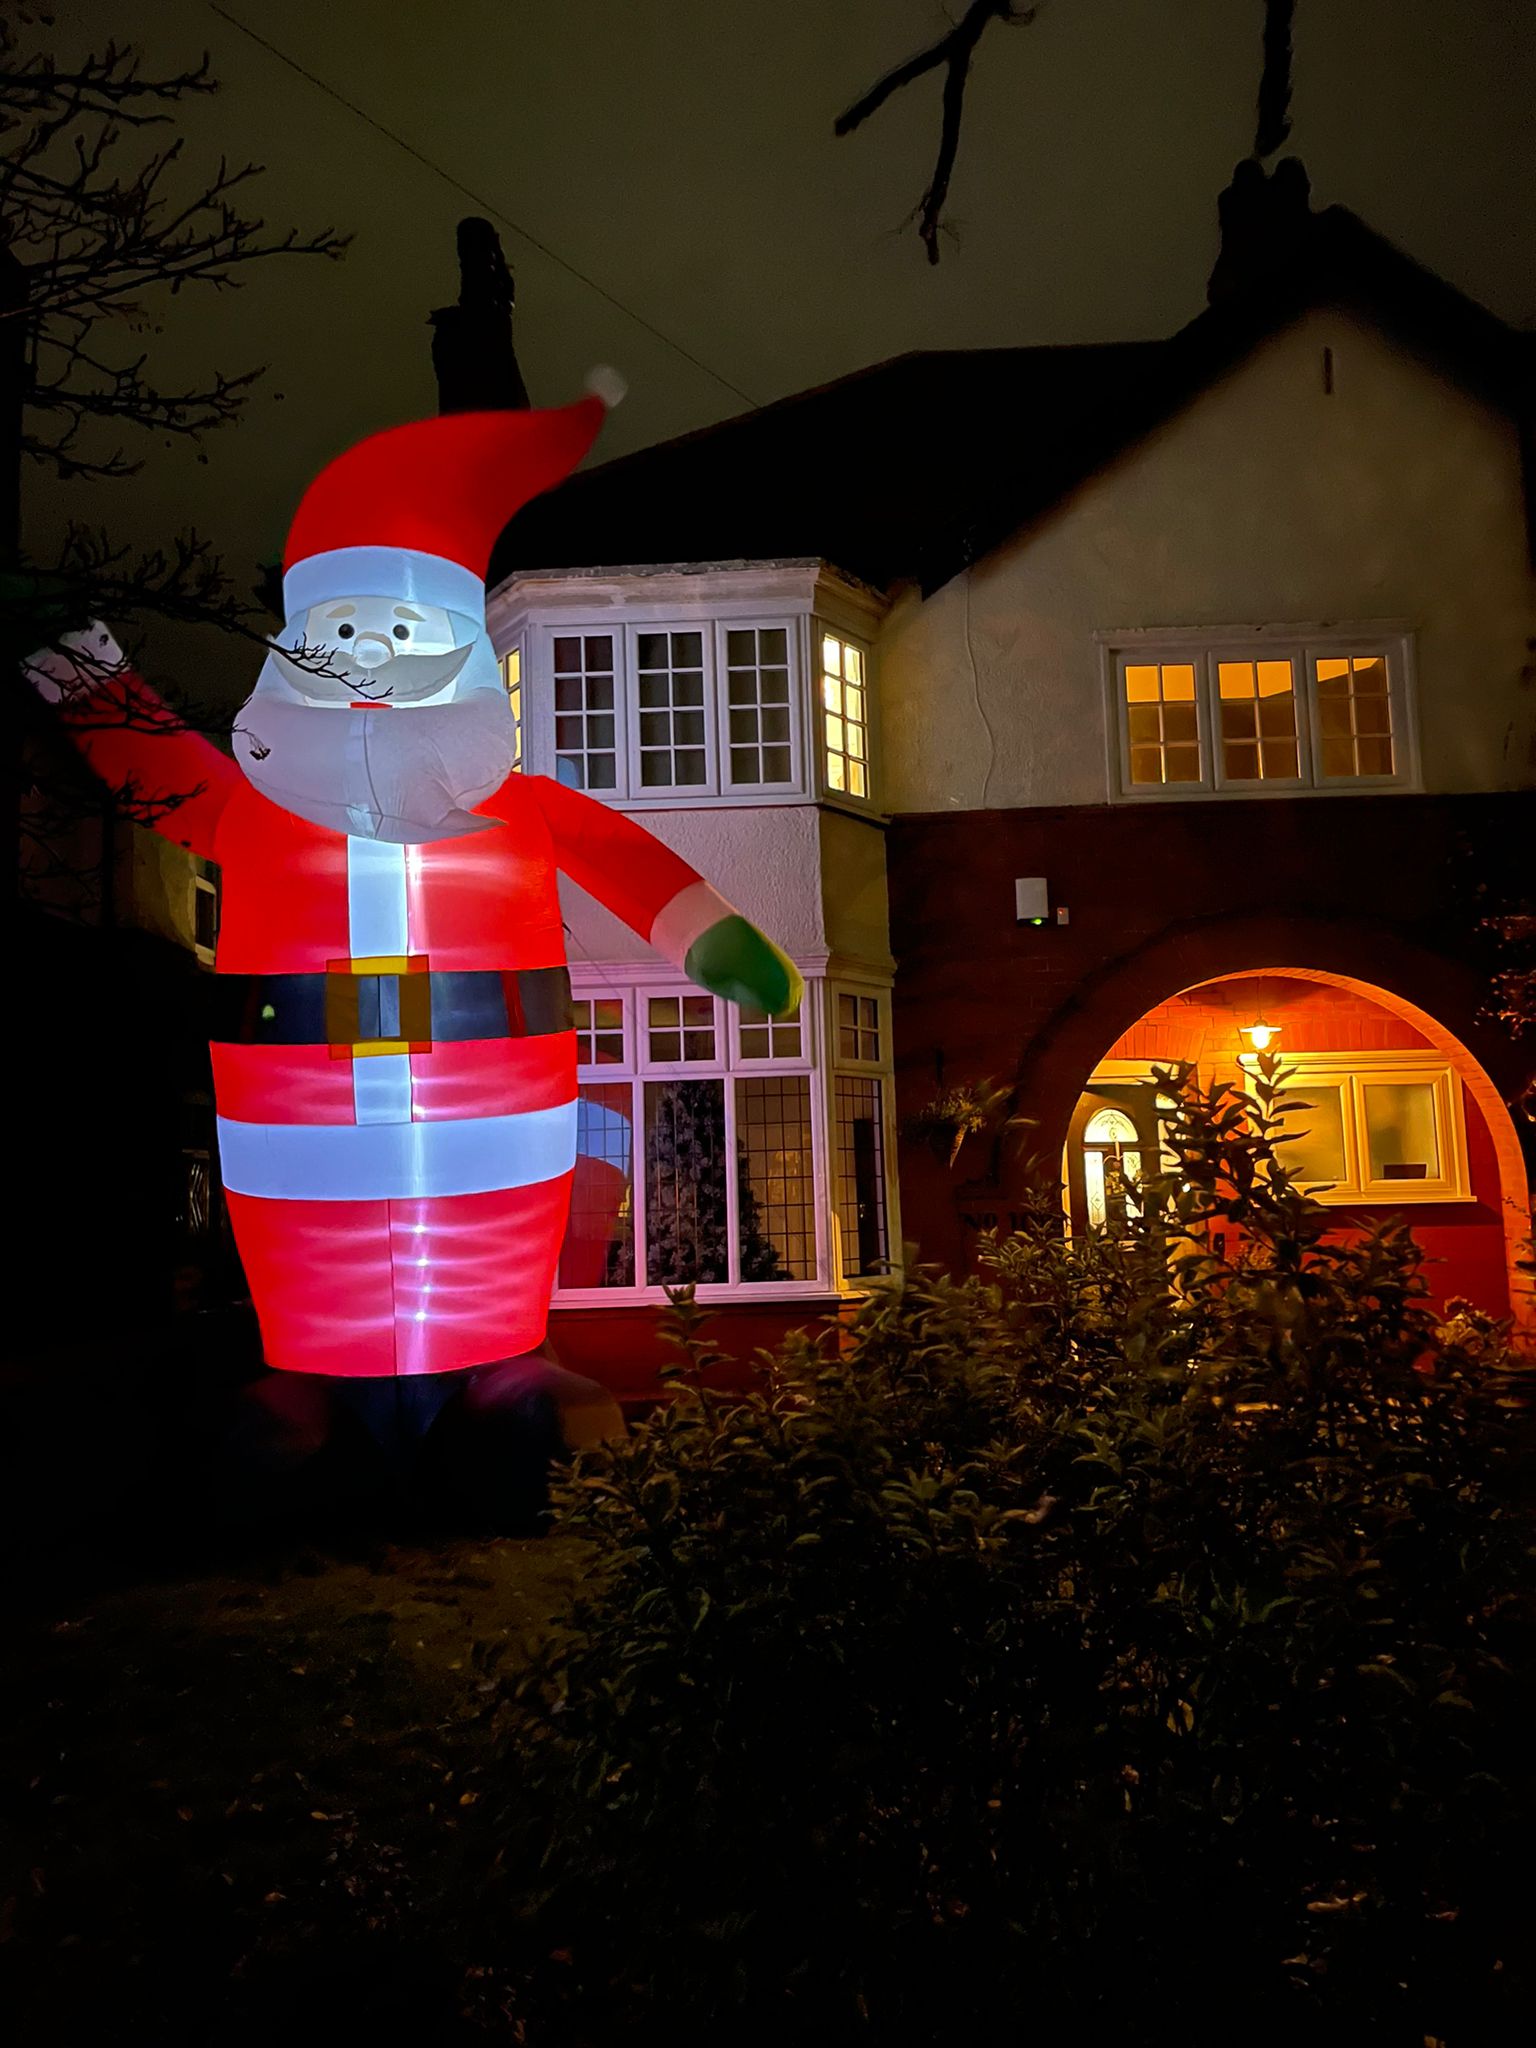 GIANT: 20ft (6m) Outdoor Inflatable Lit Christmas Santa with Raised Arm & 28 LEDs